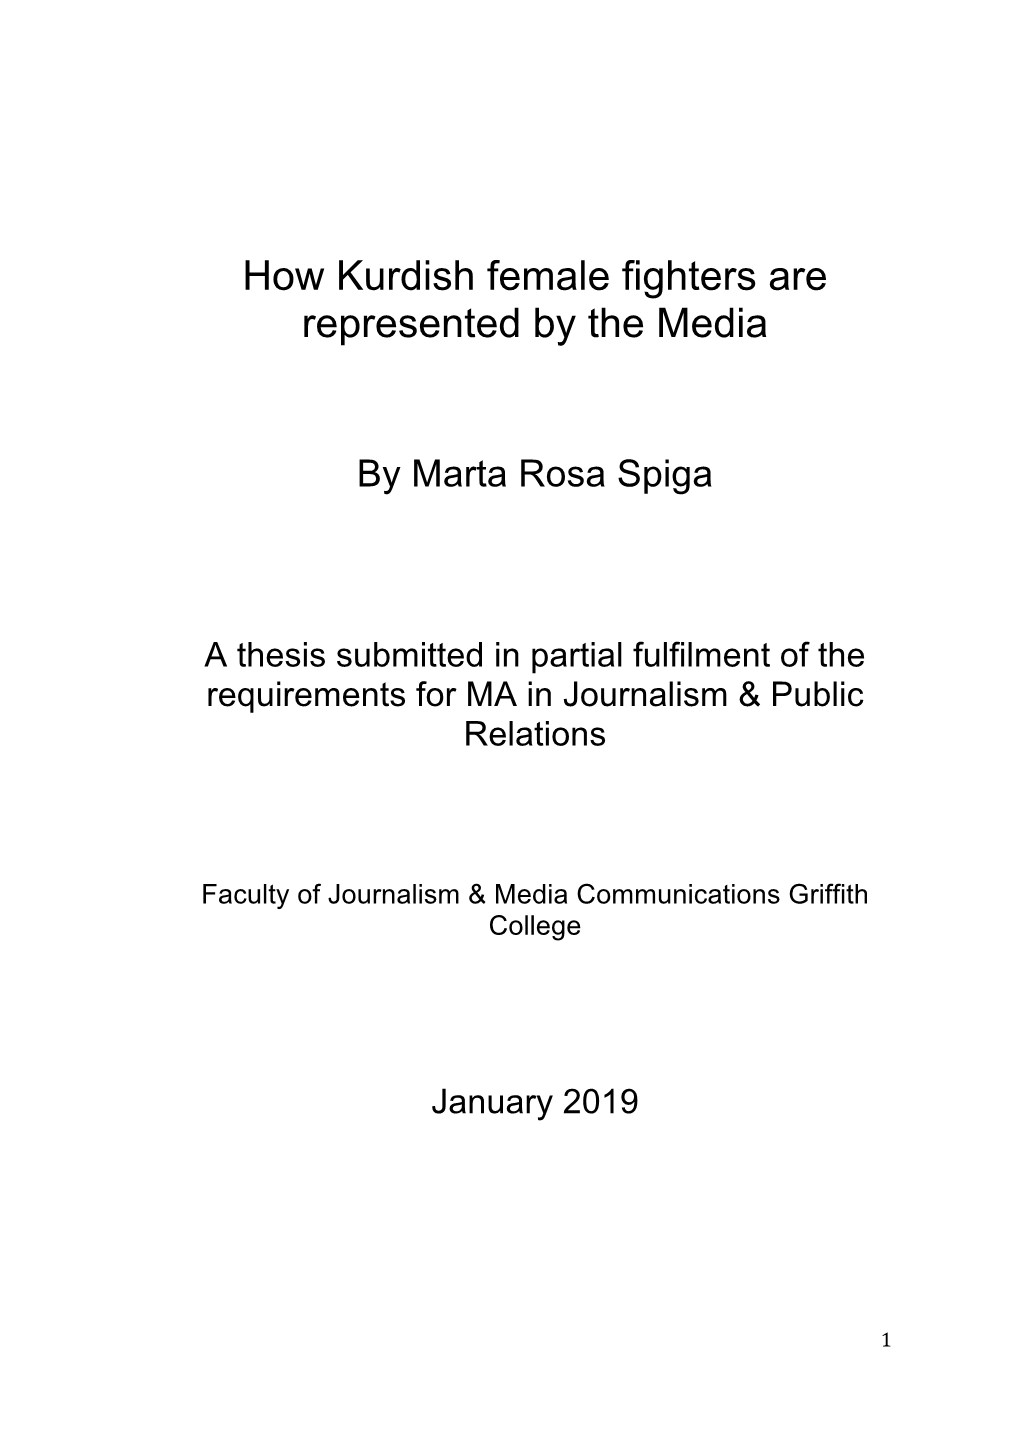 How Kurdish Female Fighters Are Represented by the Media